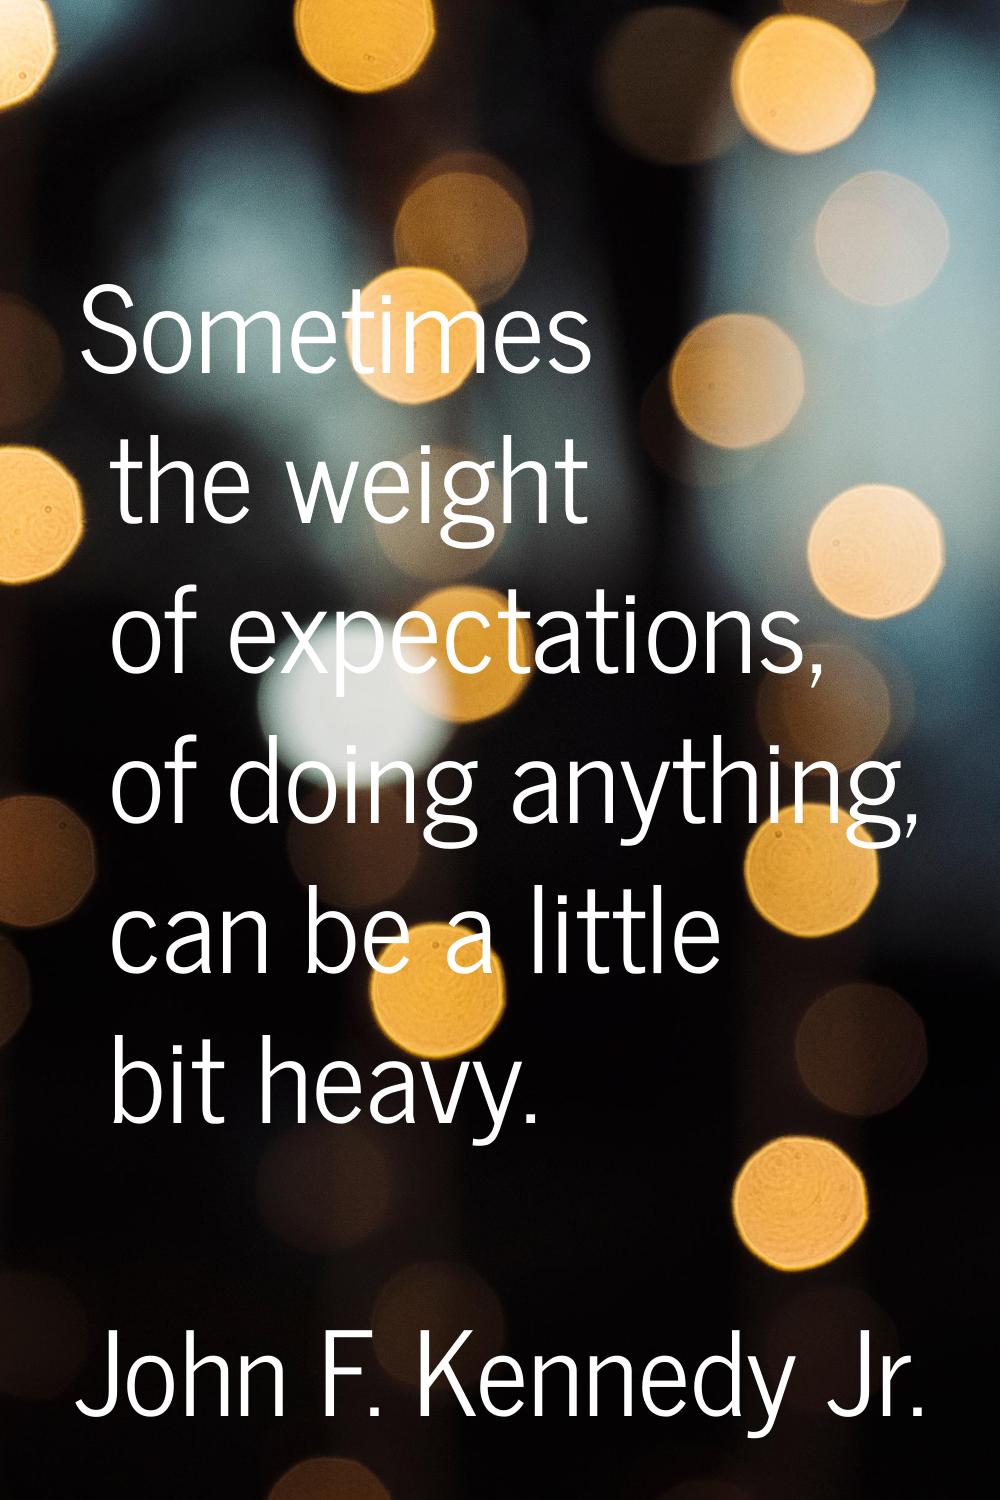 Sometimes the weight of expectations, of doing anything, can be a little bit heavy.